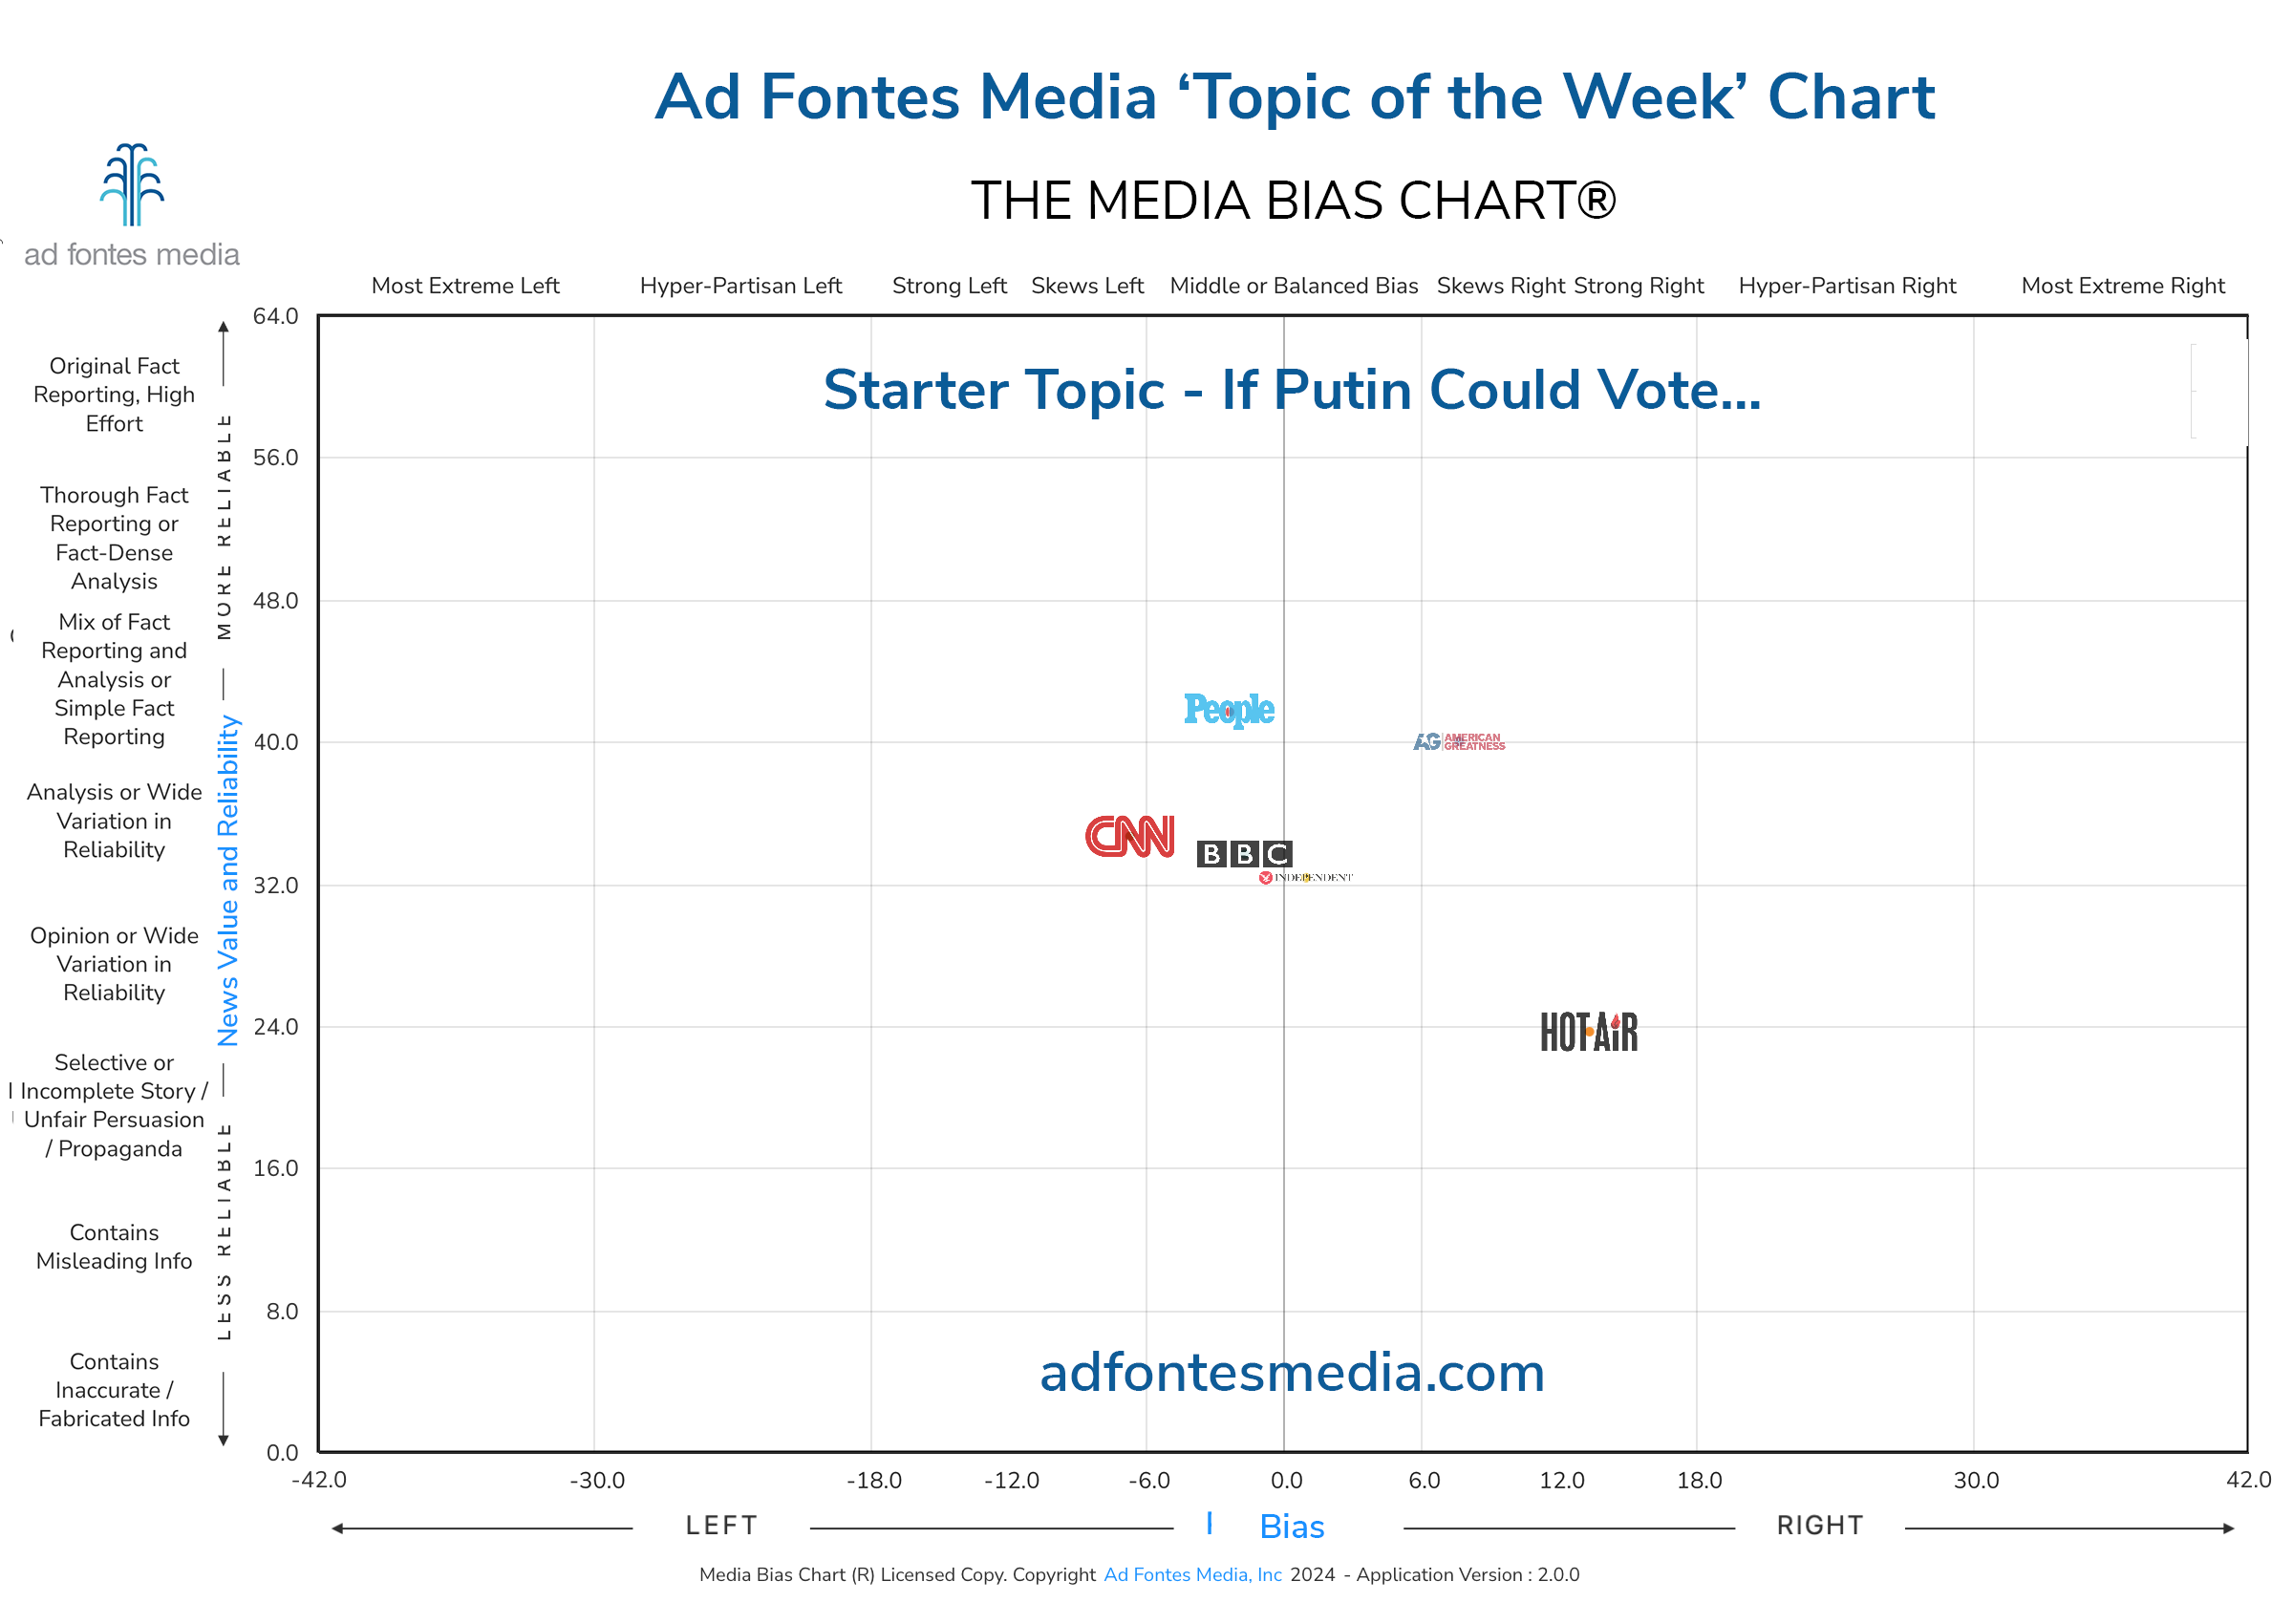 The Media Bias Chart takes a look at articles covering the story of Putin revealing his pick for U.S. president